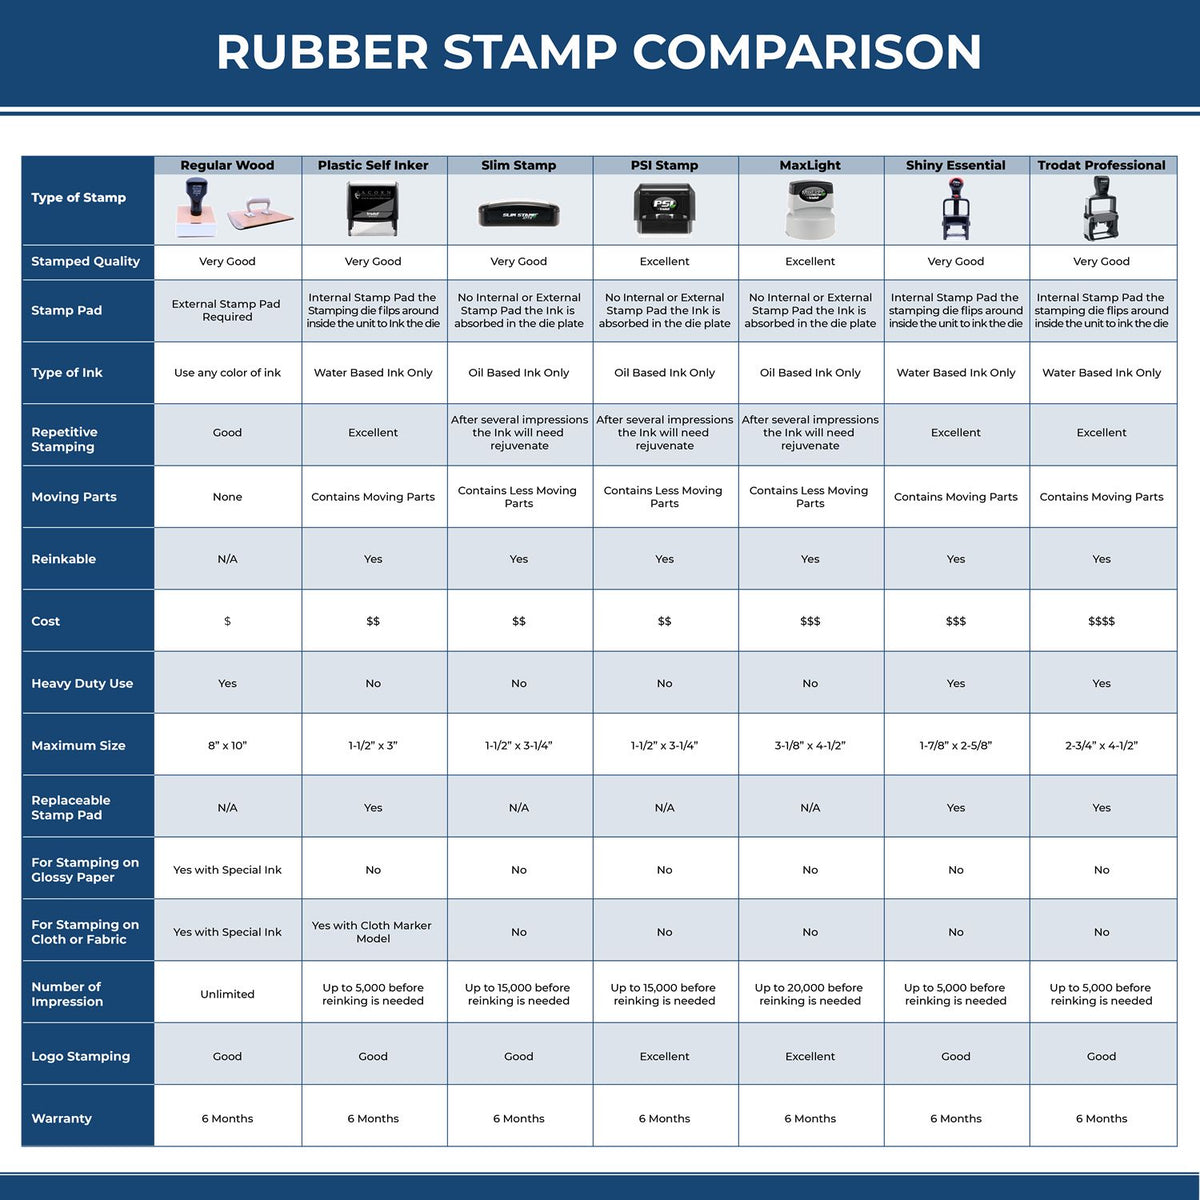 Large Official Use Only Rubber Stamp 4918R Rubber Stamp Comparison